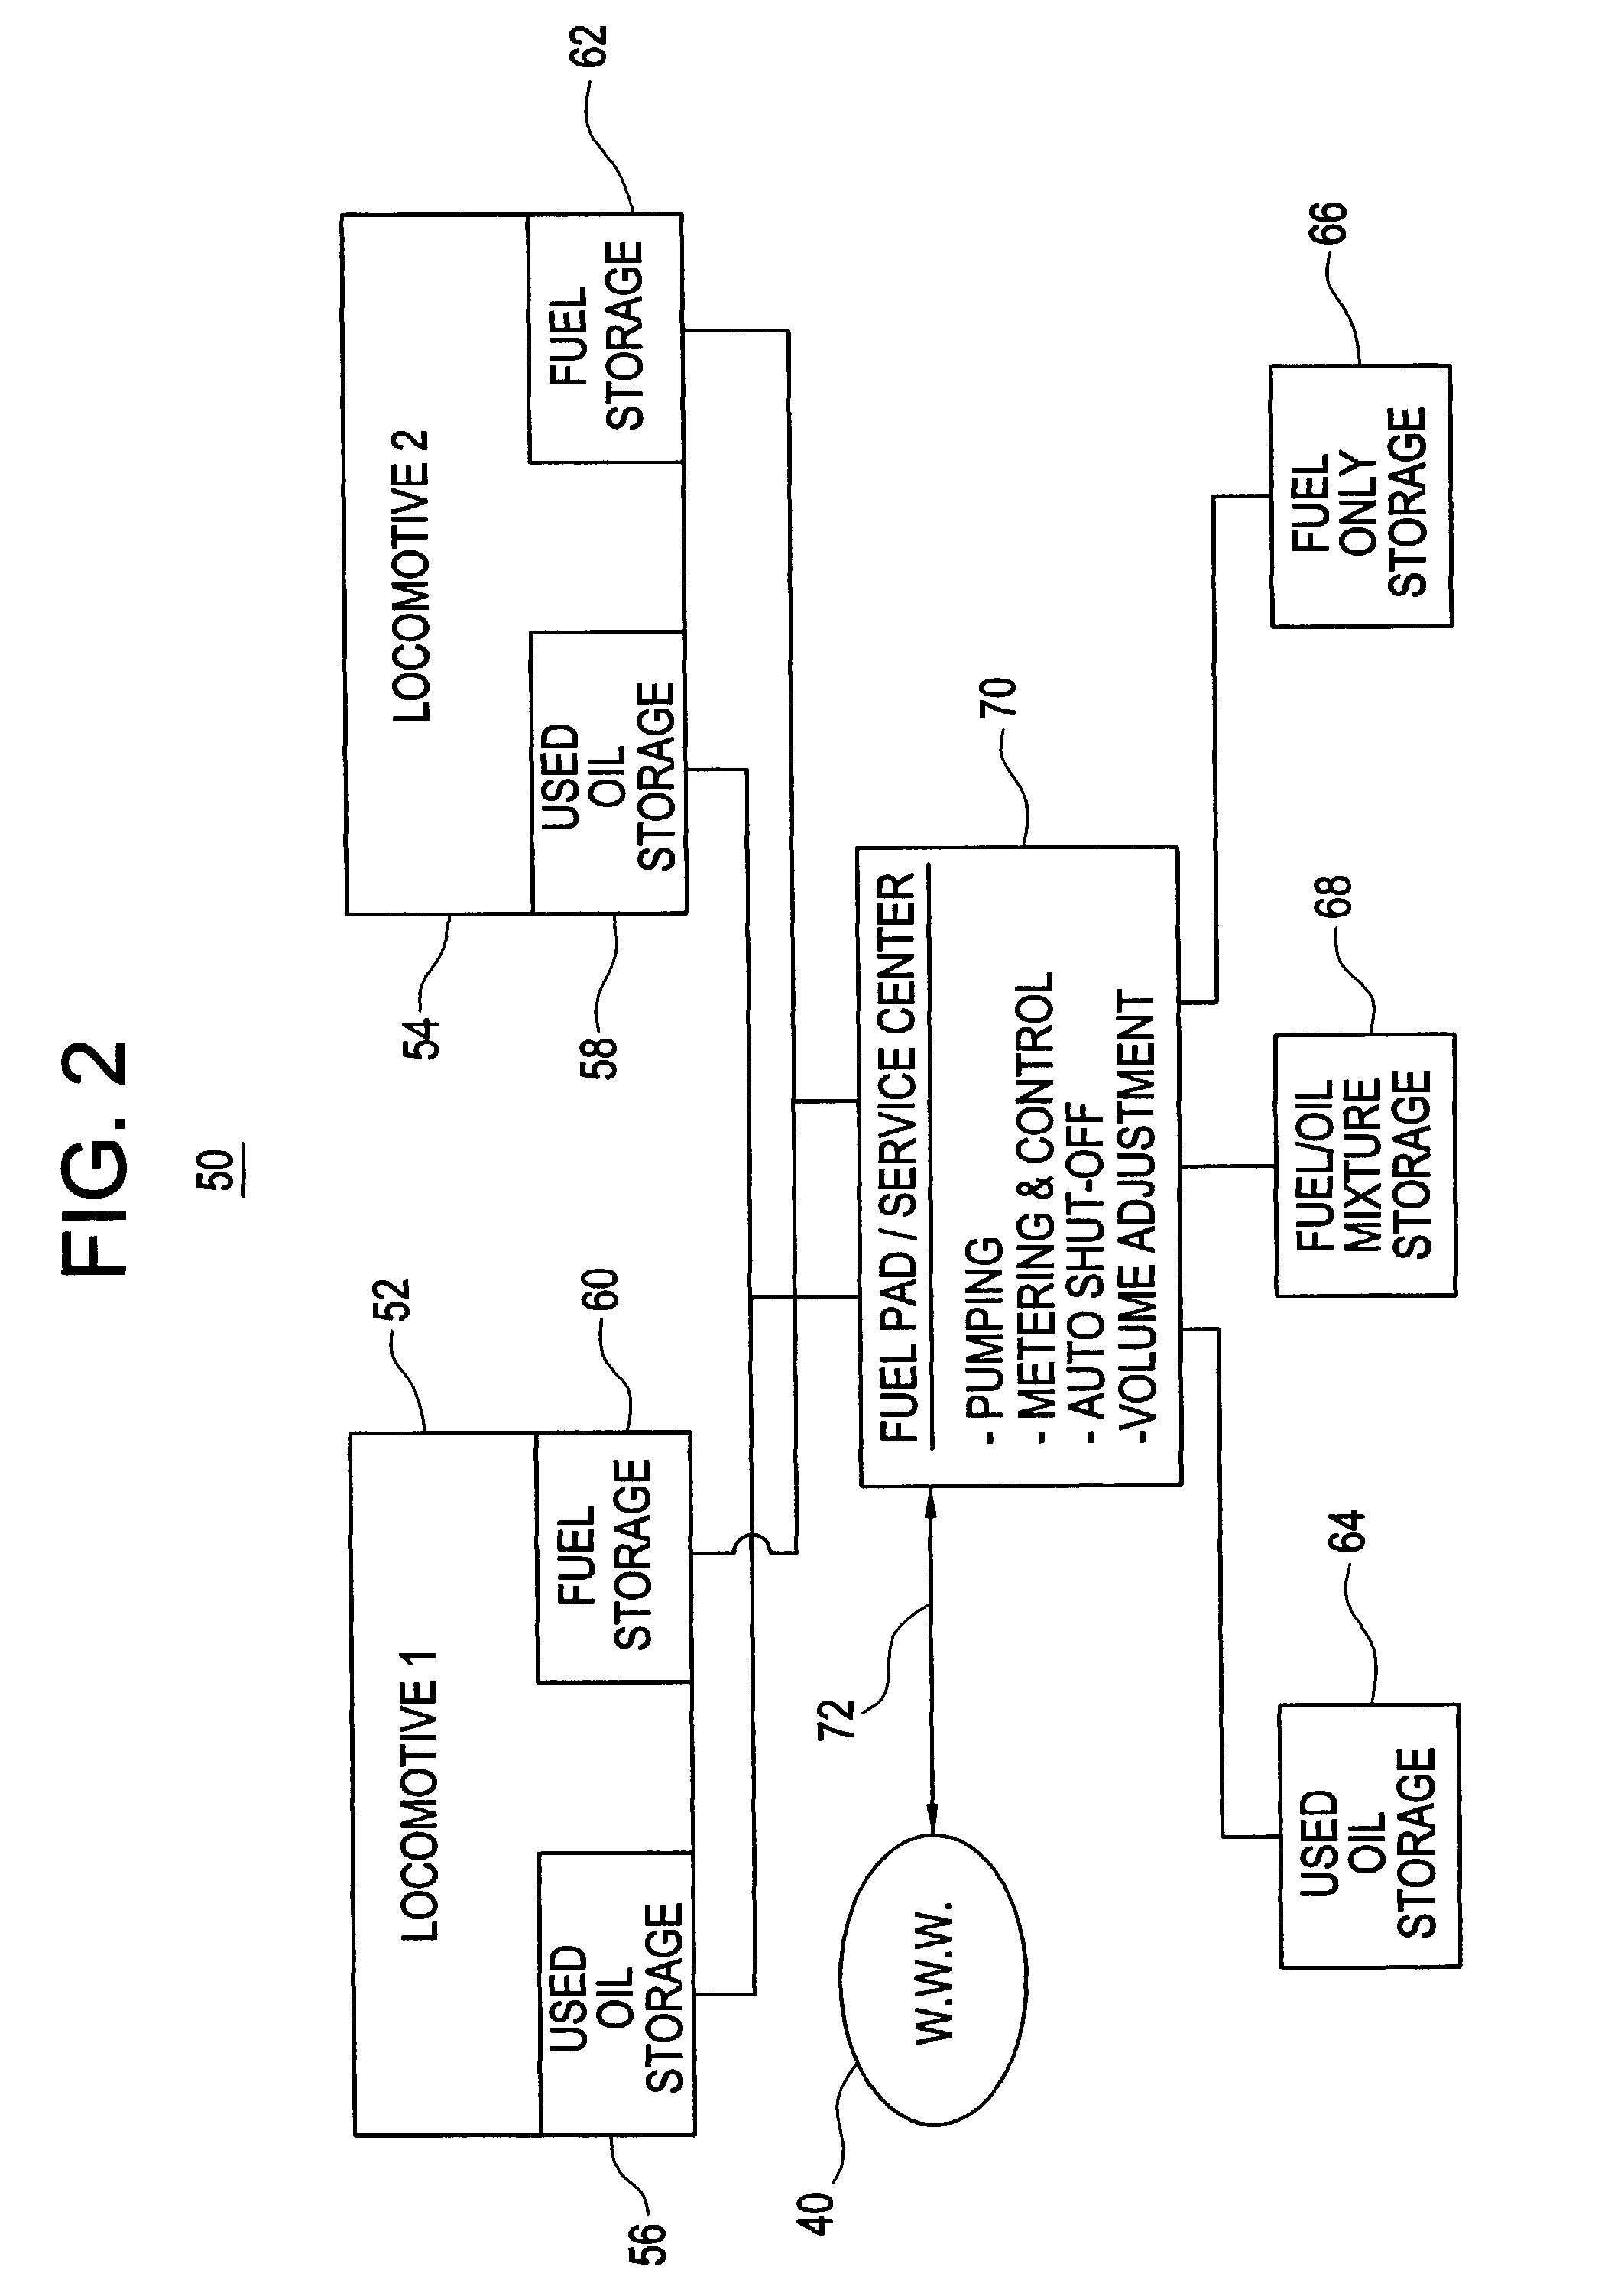 Lubricant management method for a vehicle